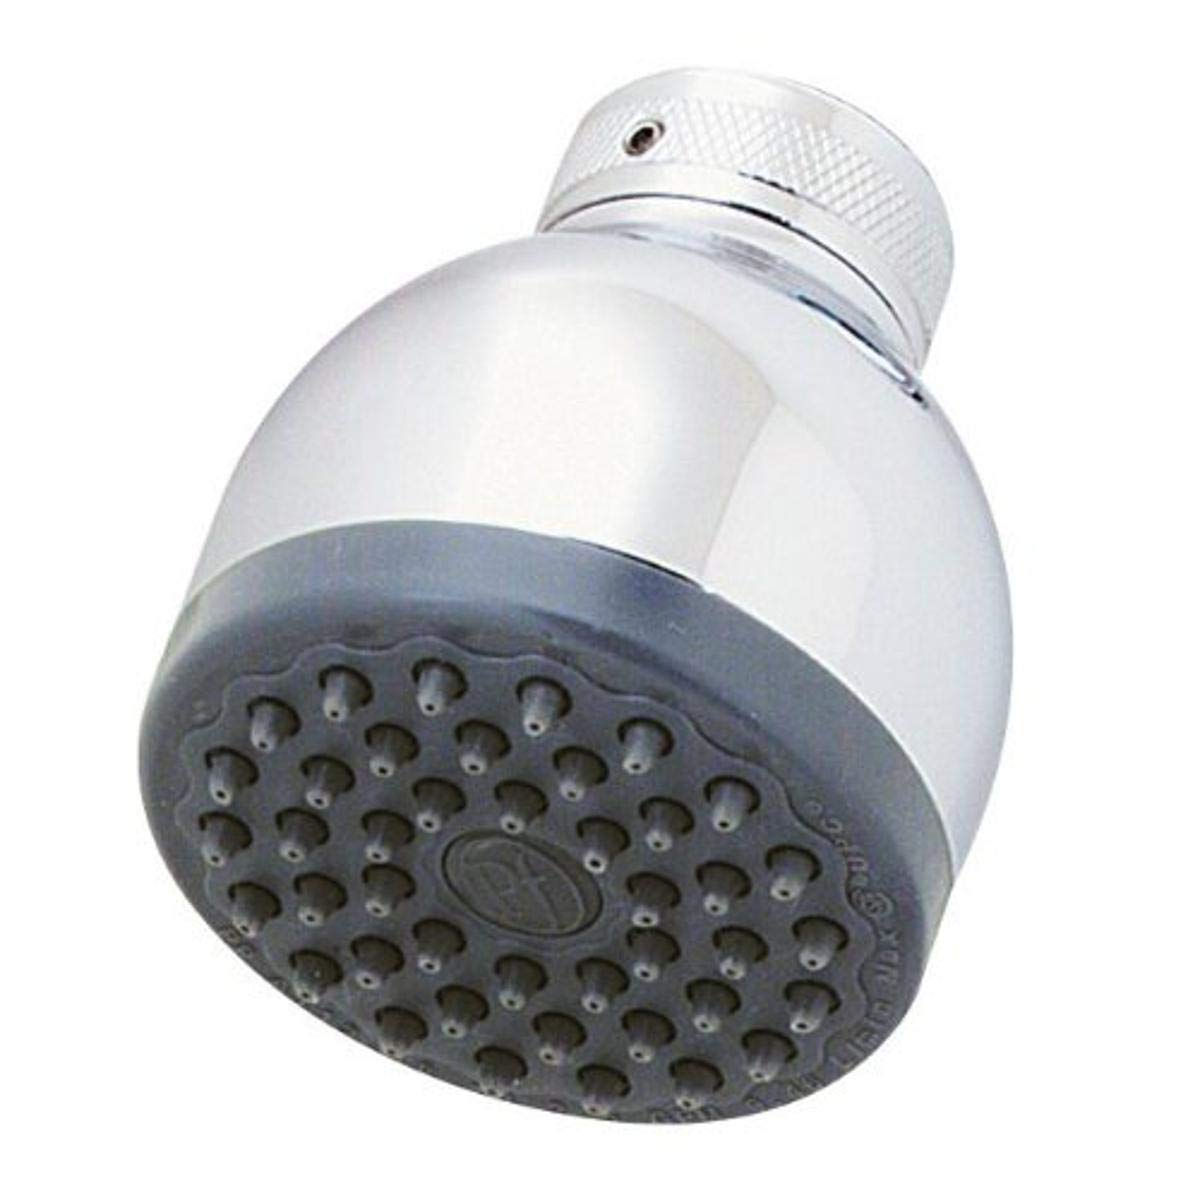 Polished Chrome Water Efficient Showerhead, 1.5 Gpm With Pressure C...